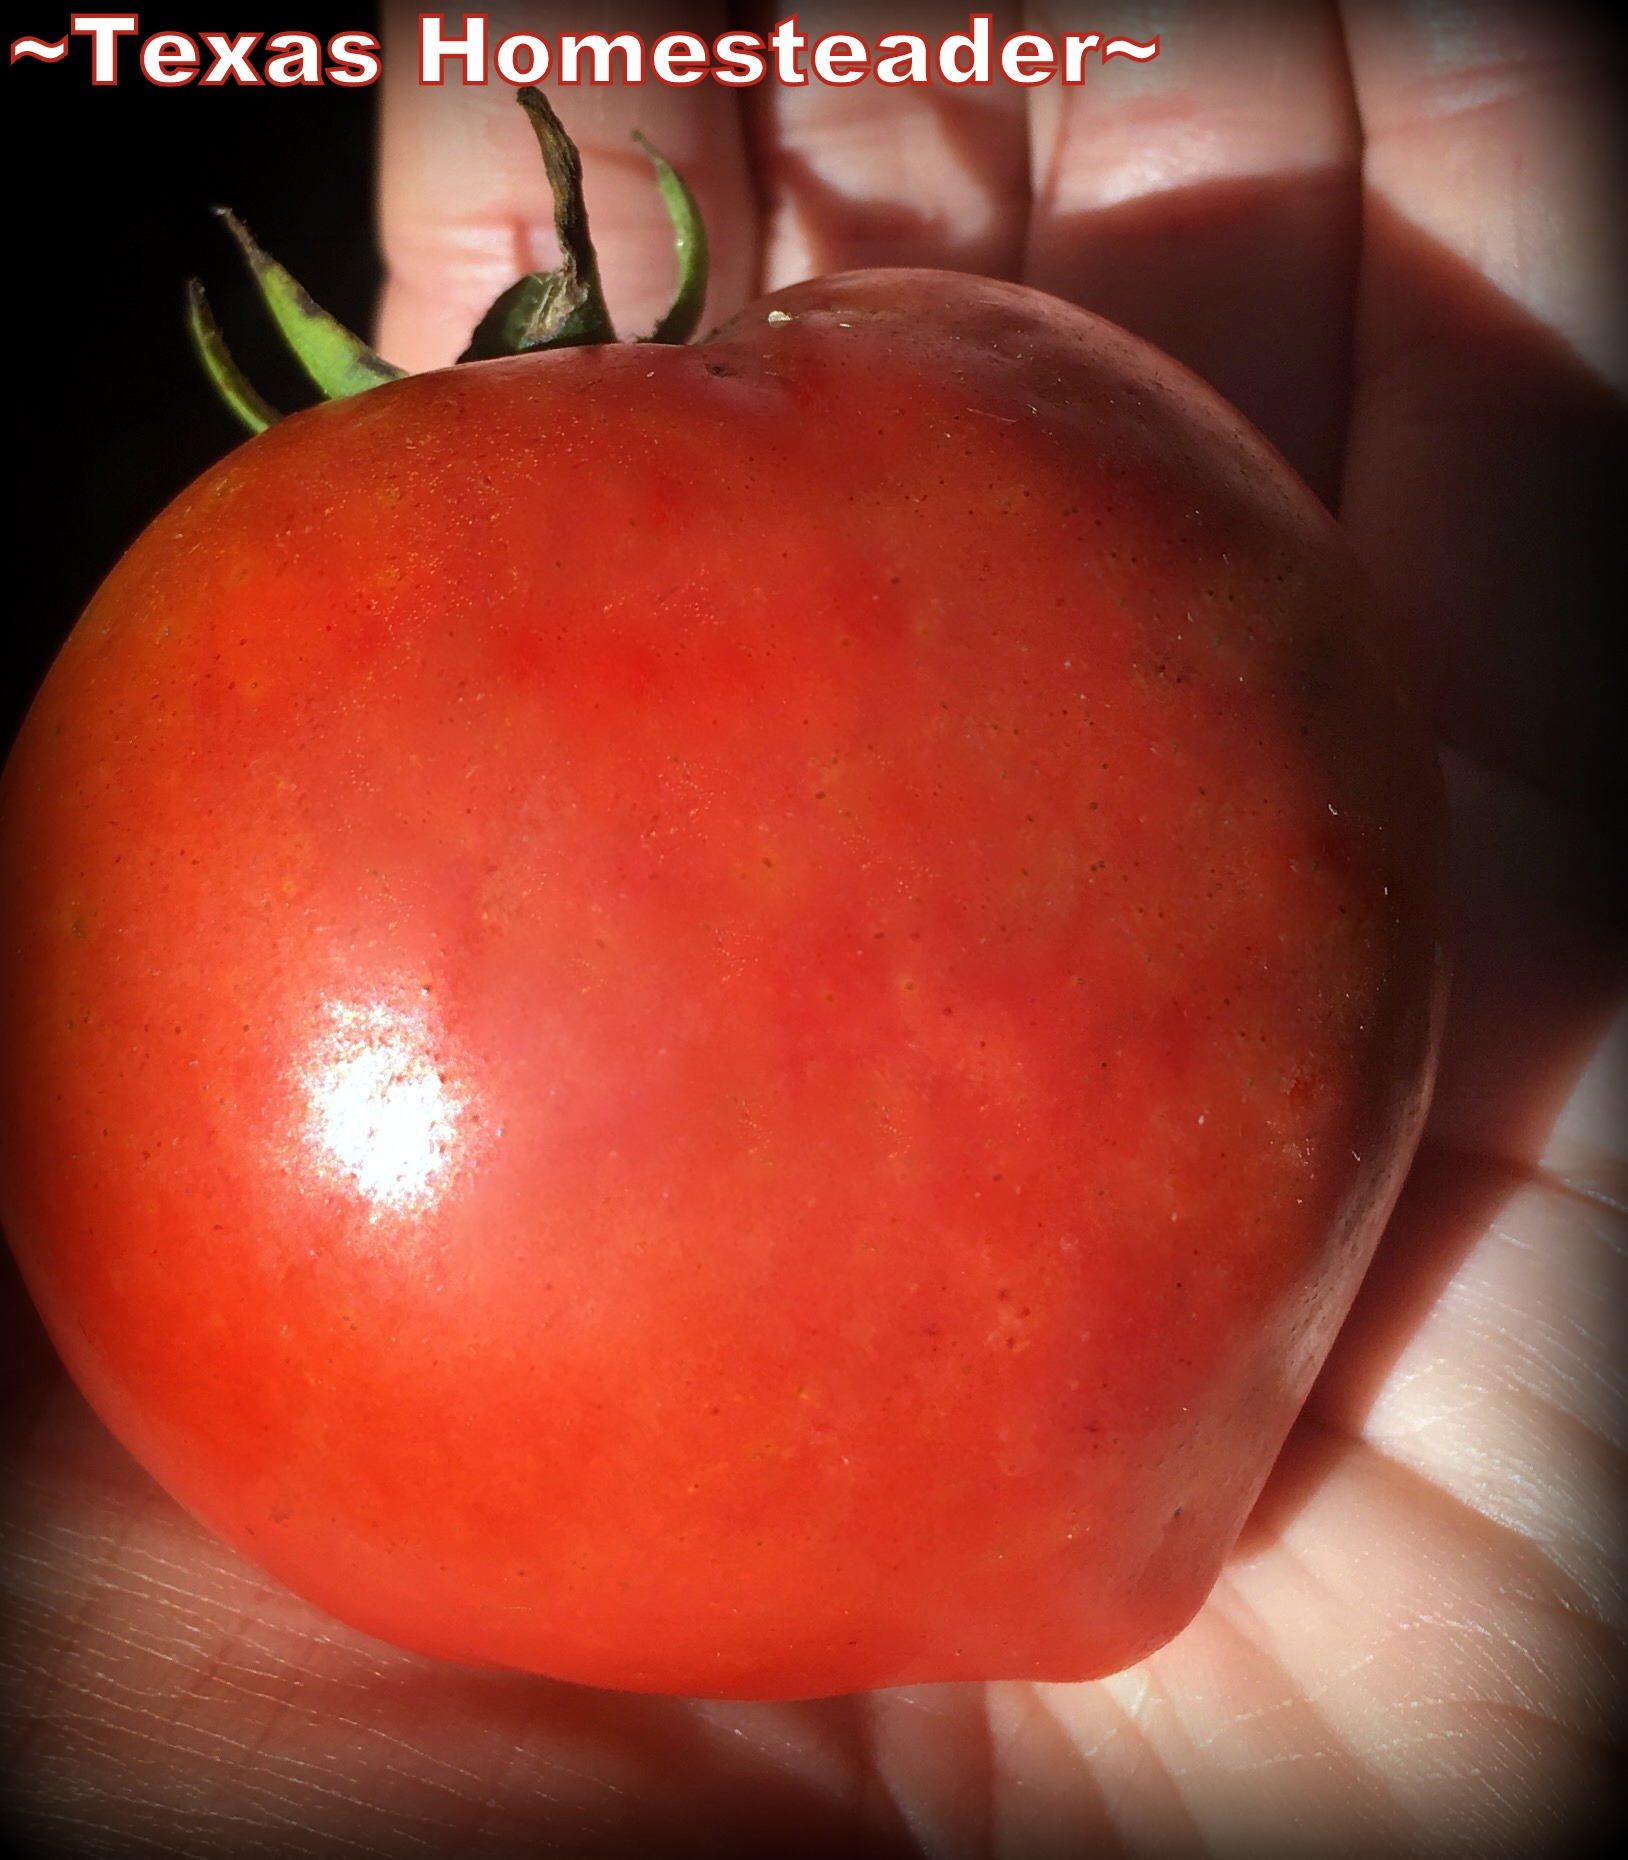 Heirloom Amish Paste tomato from seed washed beneath mom's house. #TexasHomesteader